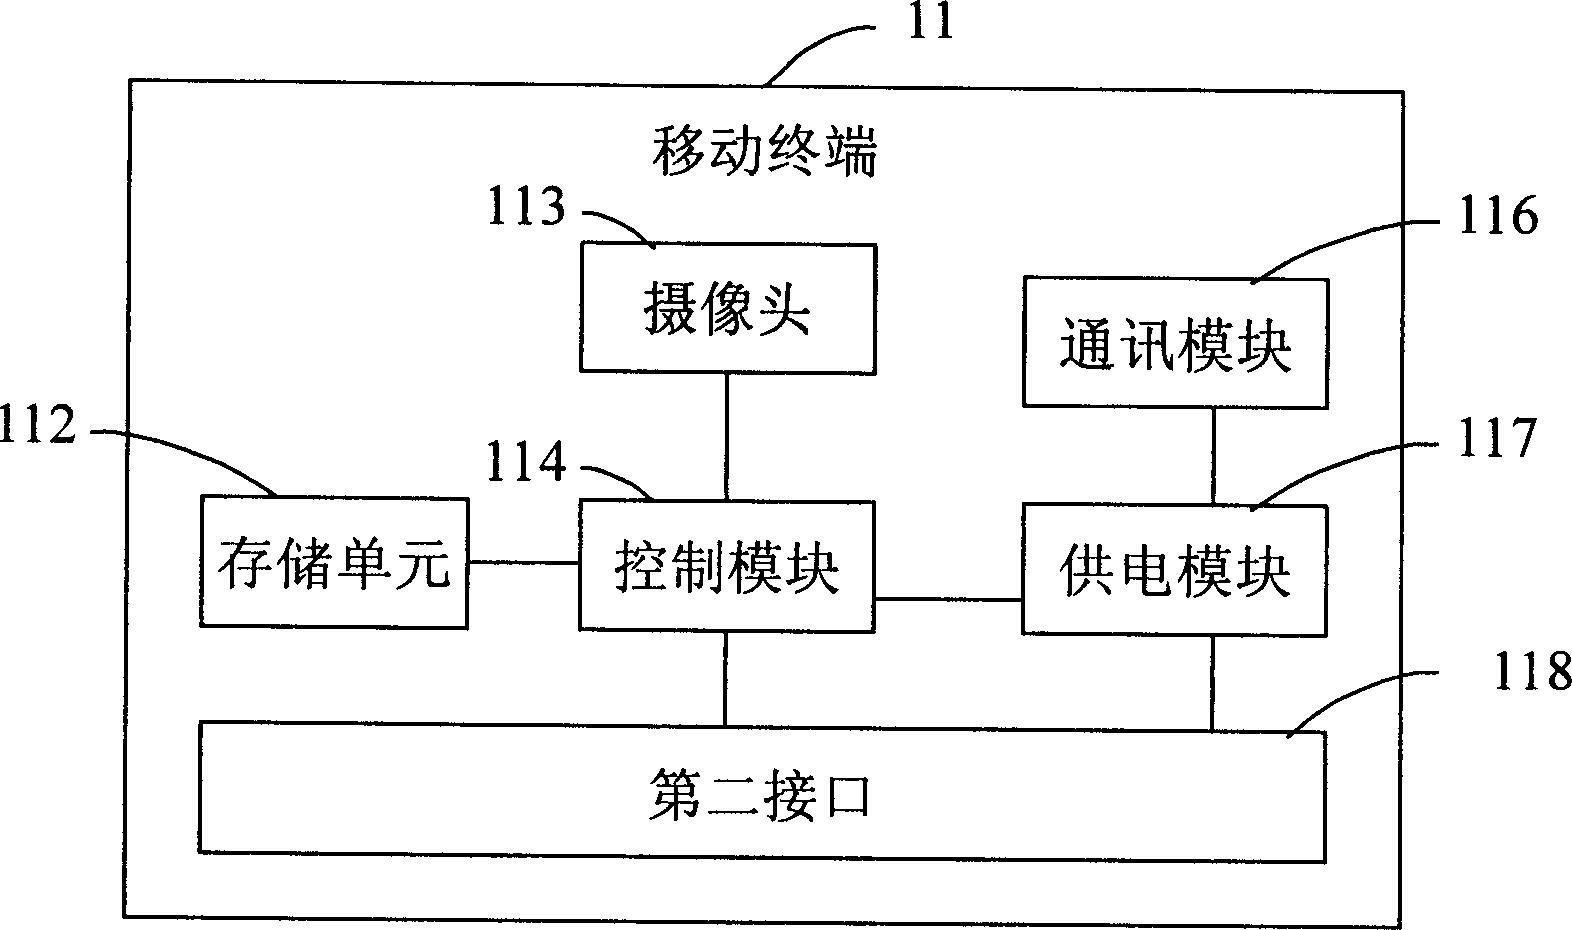 Video monitoring and controlling system and method for mobile terminal